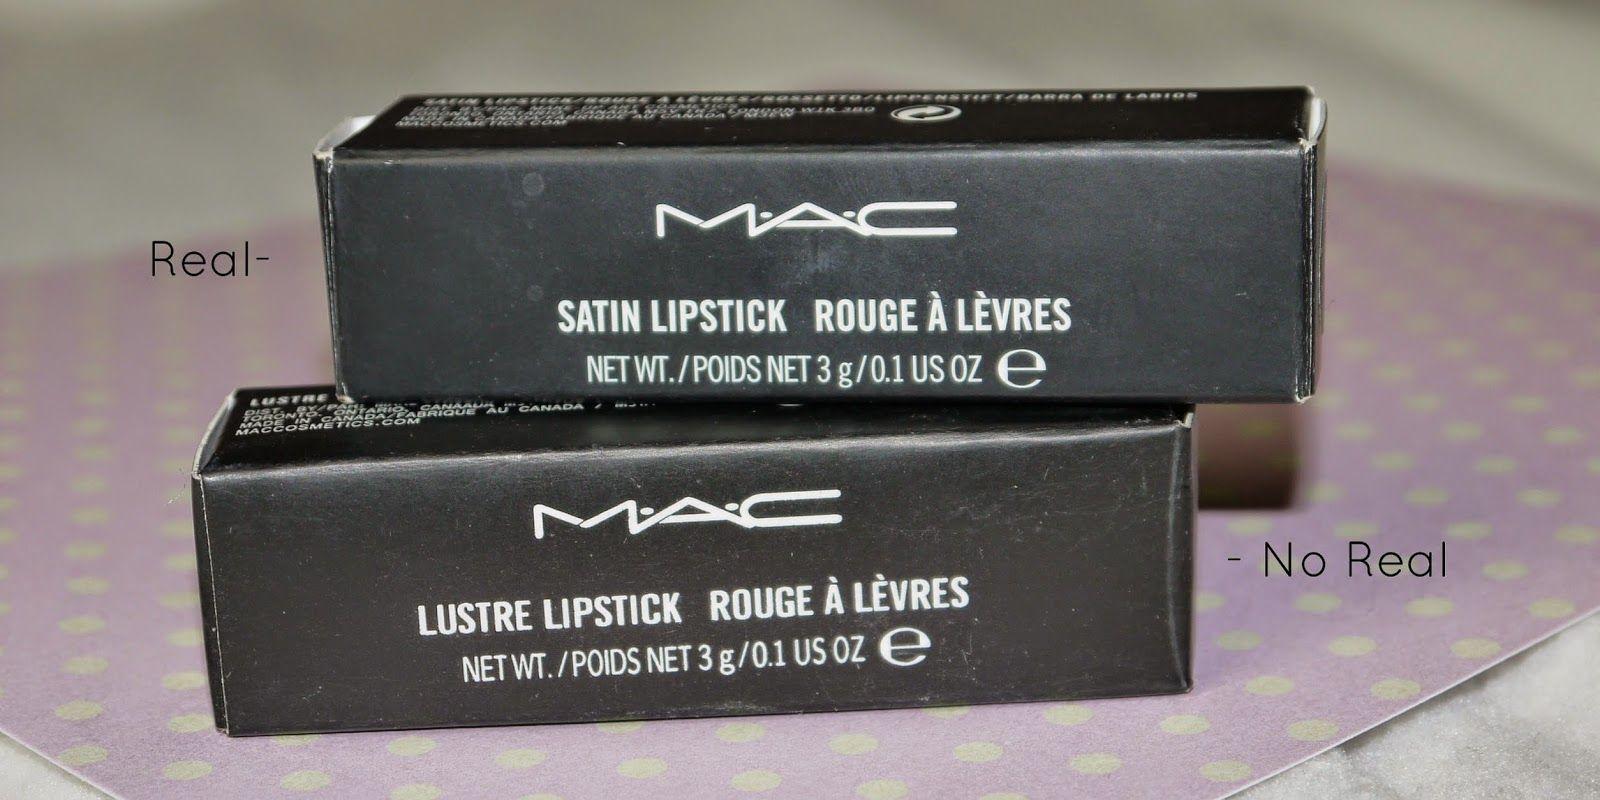 Mac Lipstick Logo - KIRSTYLEIGH: How to Notice a Fake